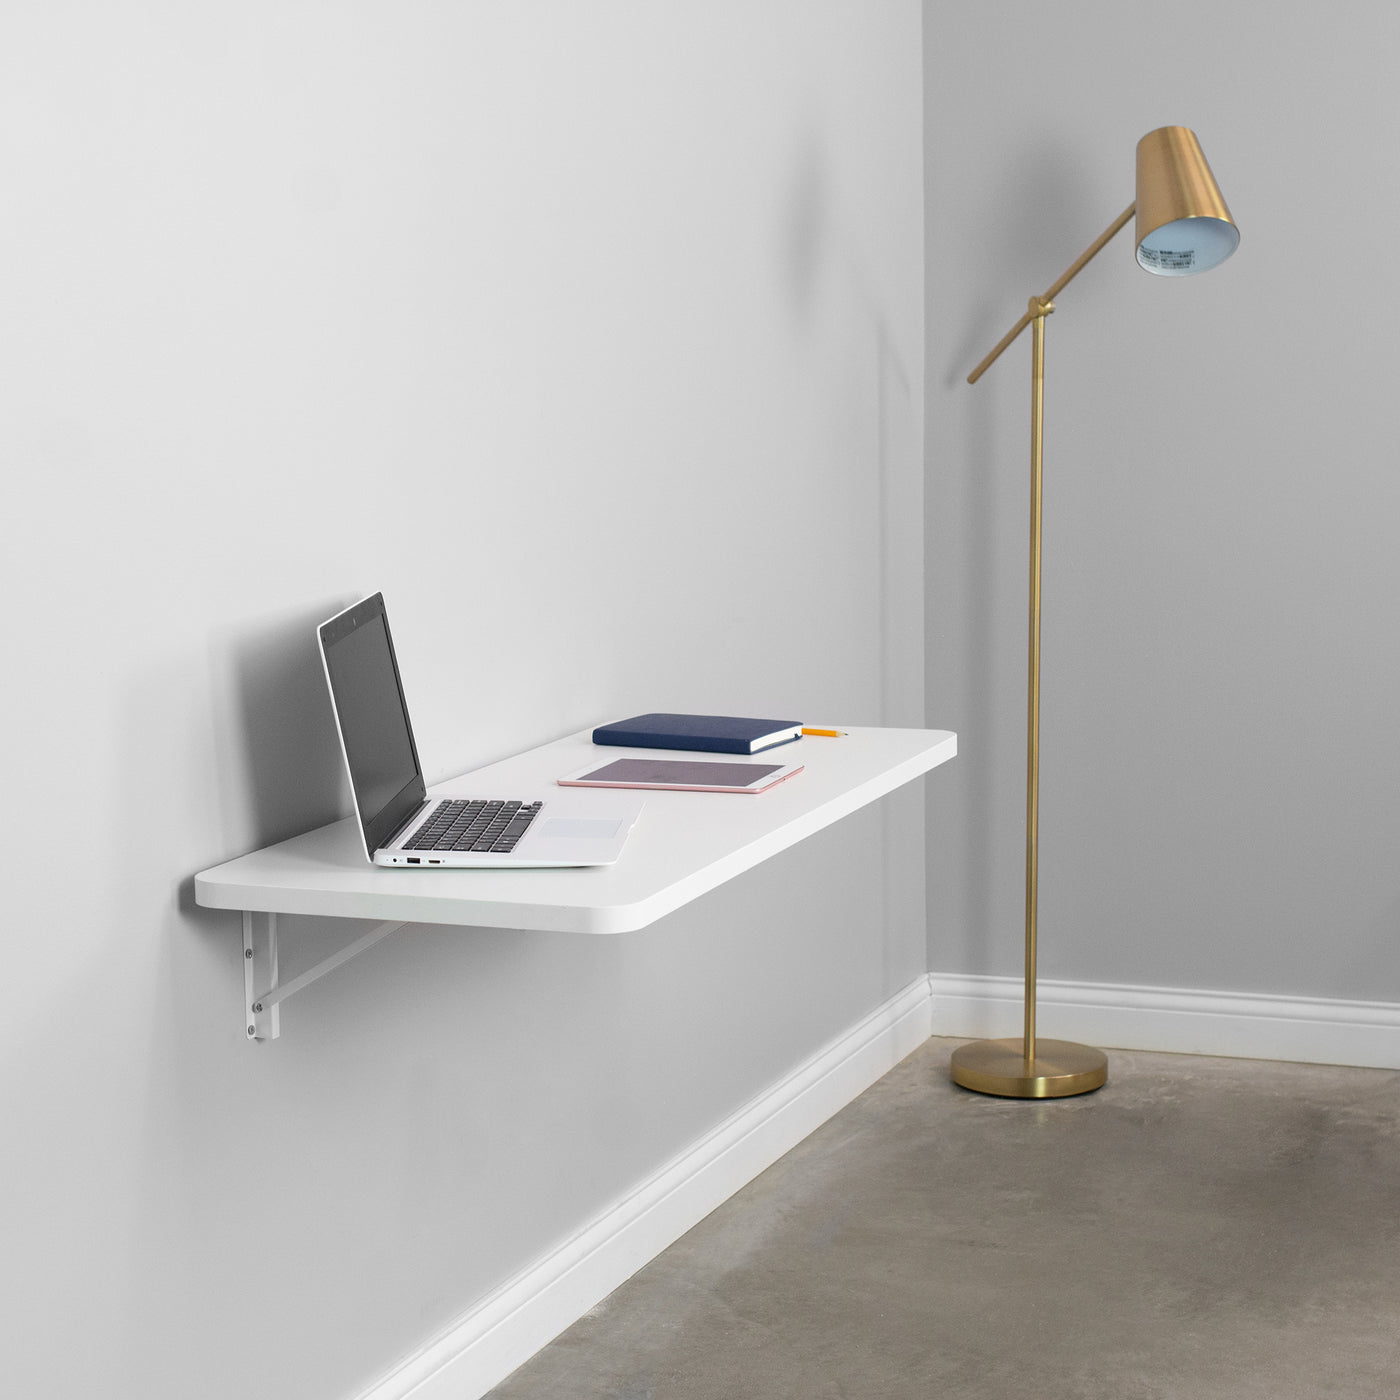 Modern and minimalist workspace with a folding shelf holding a laptop tablet and book.